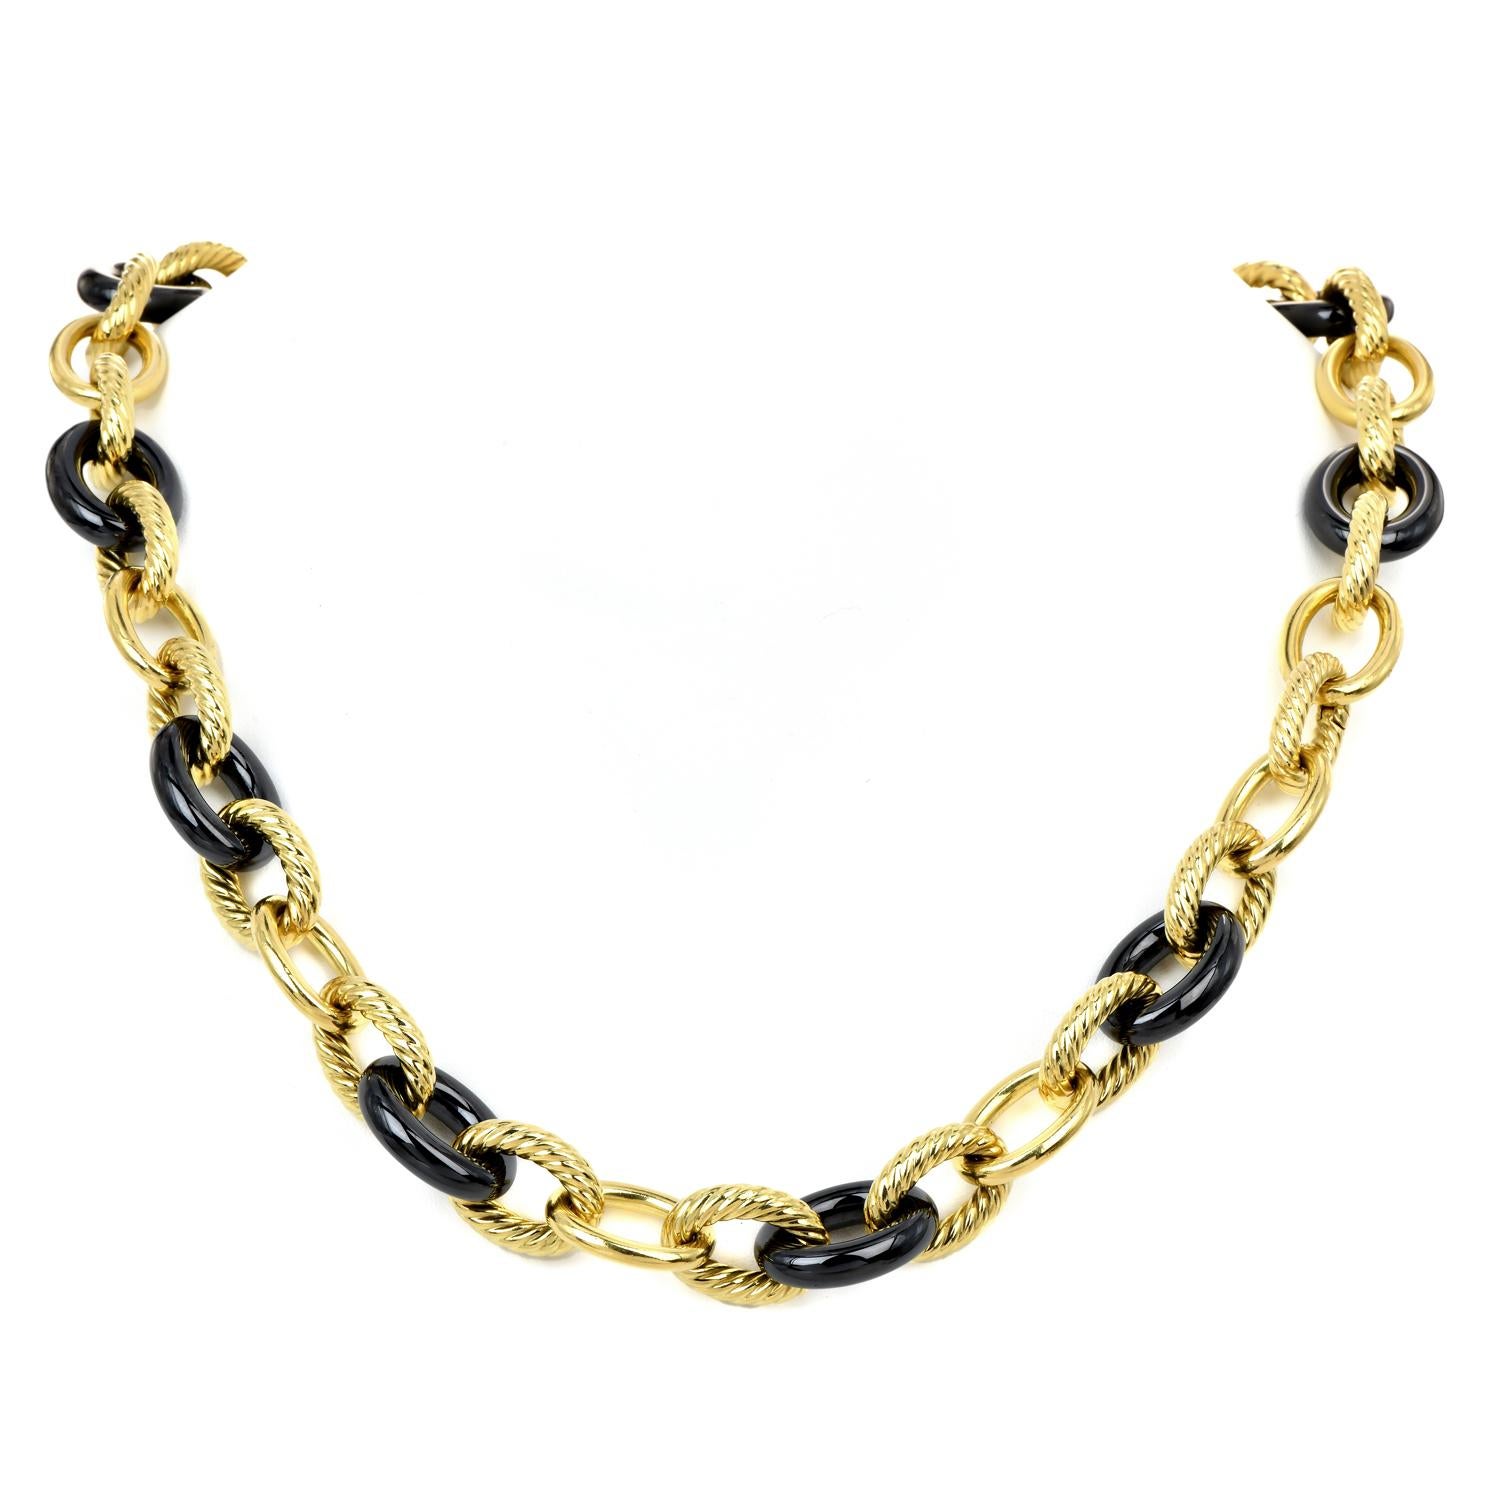 A bold luxurious David Yurman Piece, perfect for unisex wear.

With interpolated, hematite links, polished gold links, and rope design links.

This necklace is made in 18K yellow gold. Secured by a discrete hinged clasp.

Each hematite Link